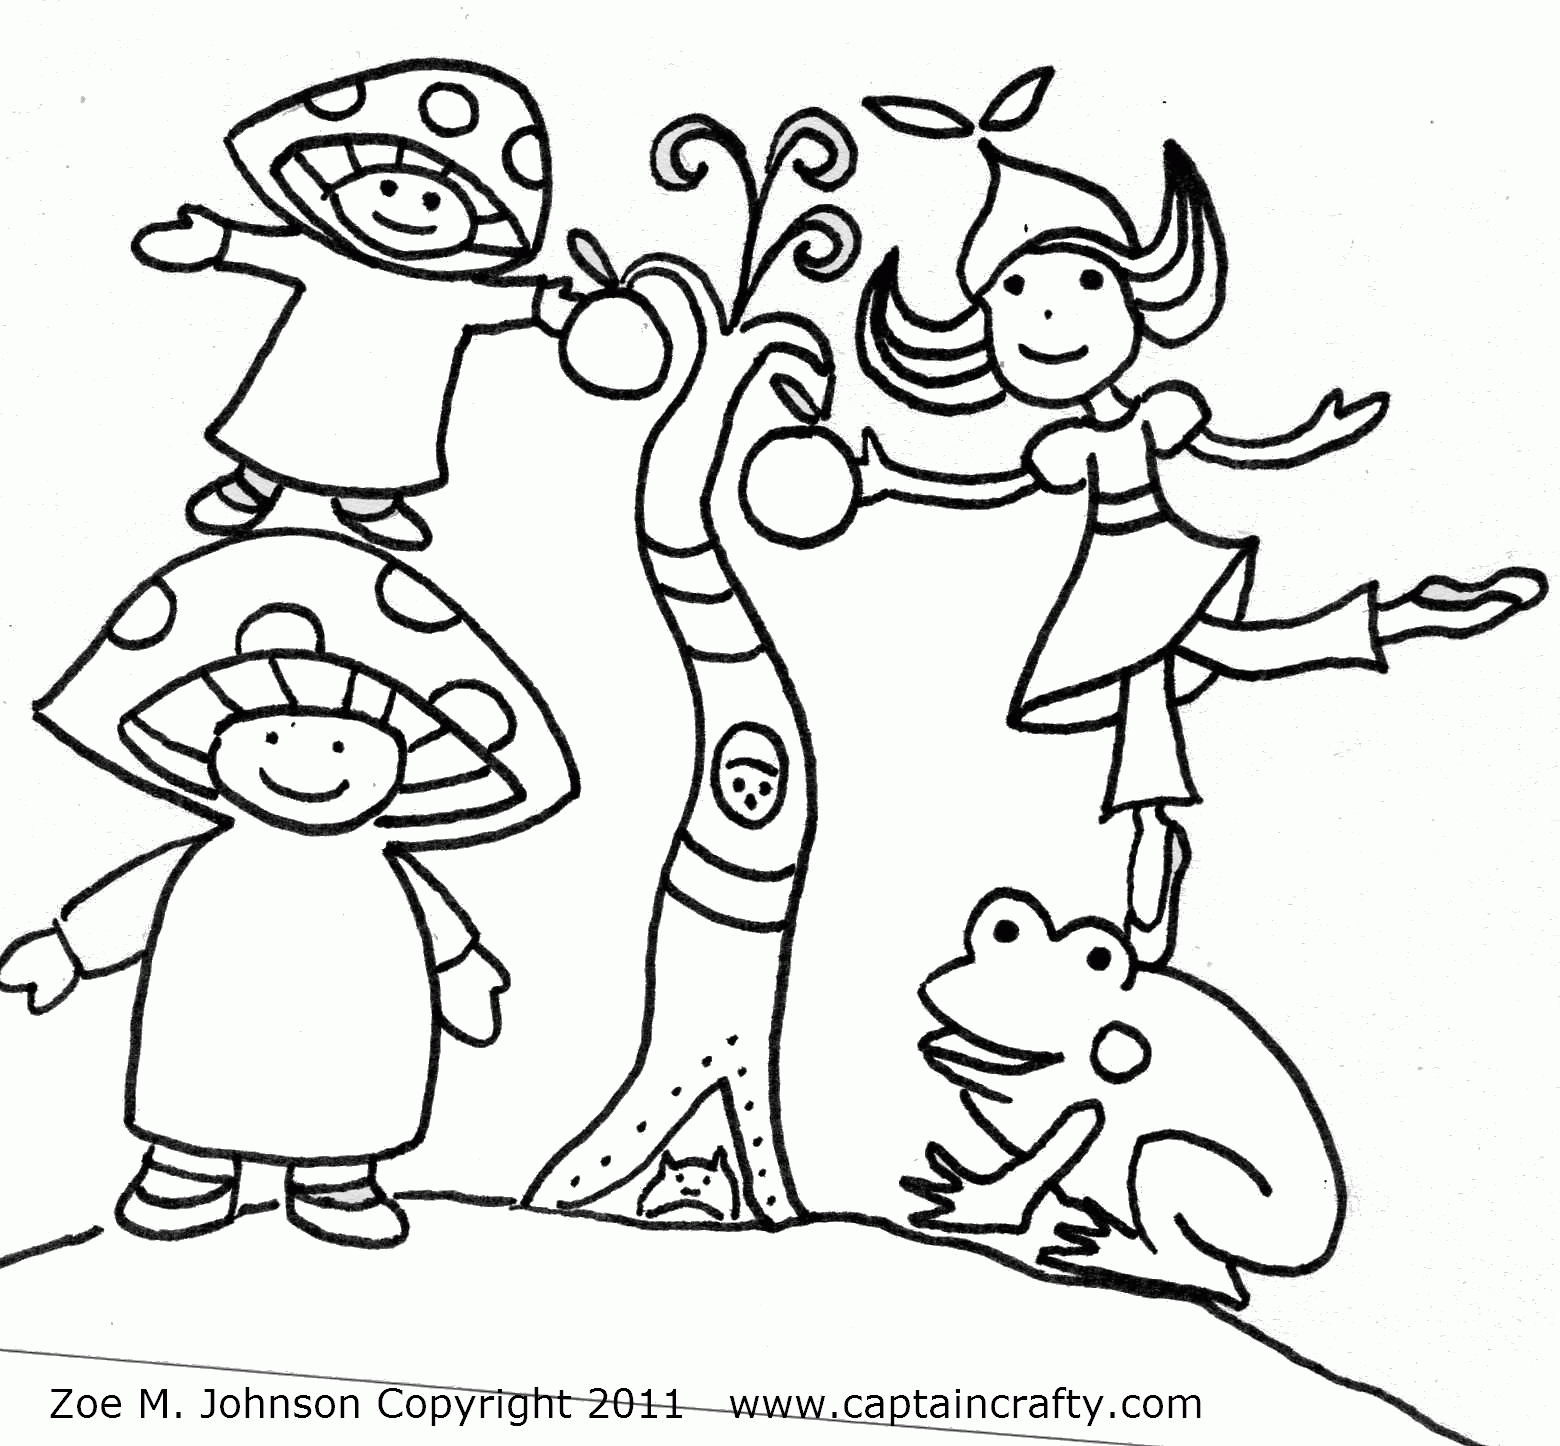 Tag Archive for "coloring pages" - The Handmade Adventures of ...